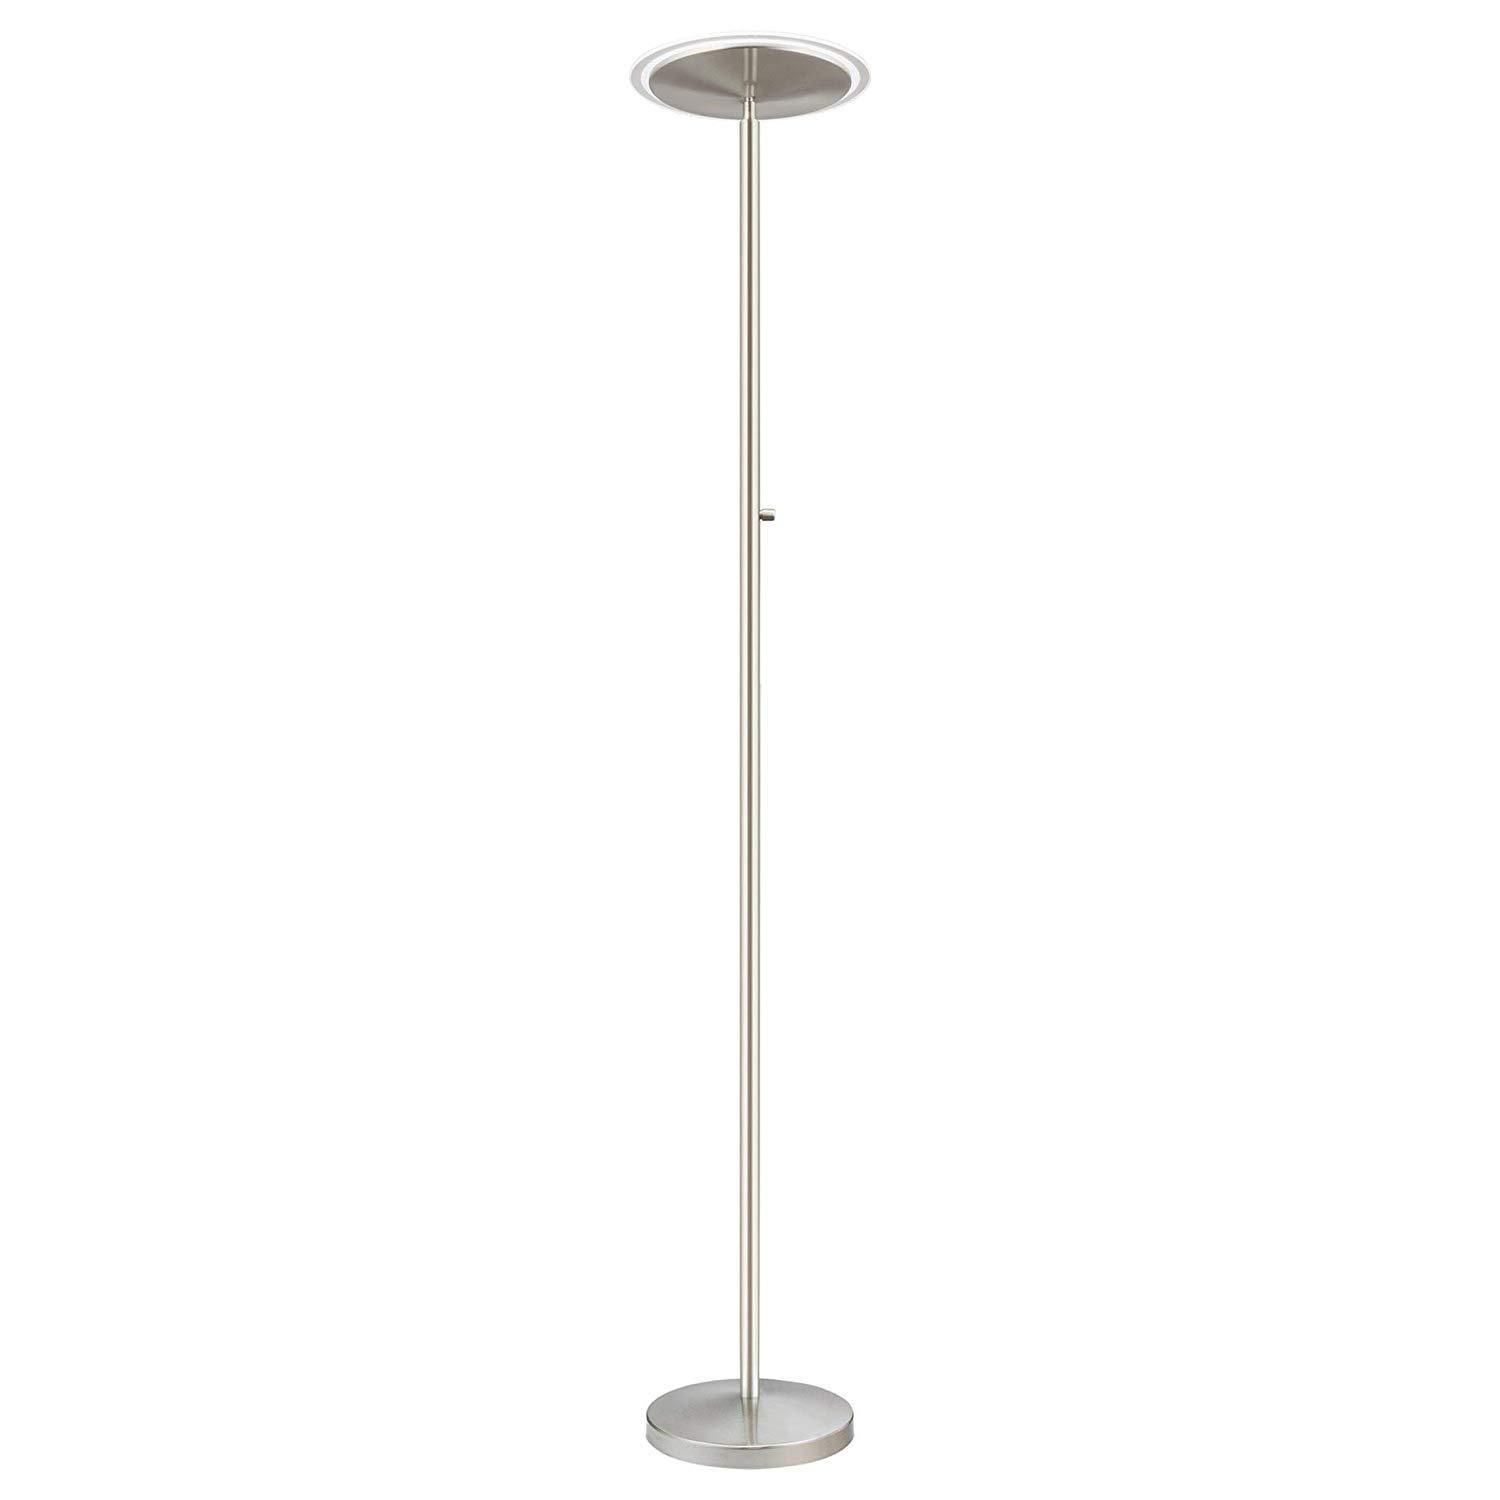 Kira Home Horizon 70 Modern Led Torchiere Floor Lamp 36w pertaining to size 1500 X 1500